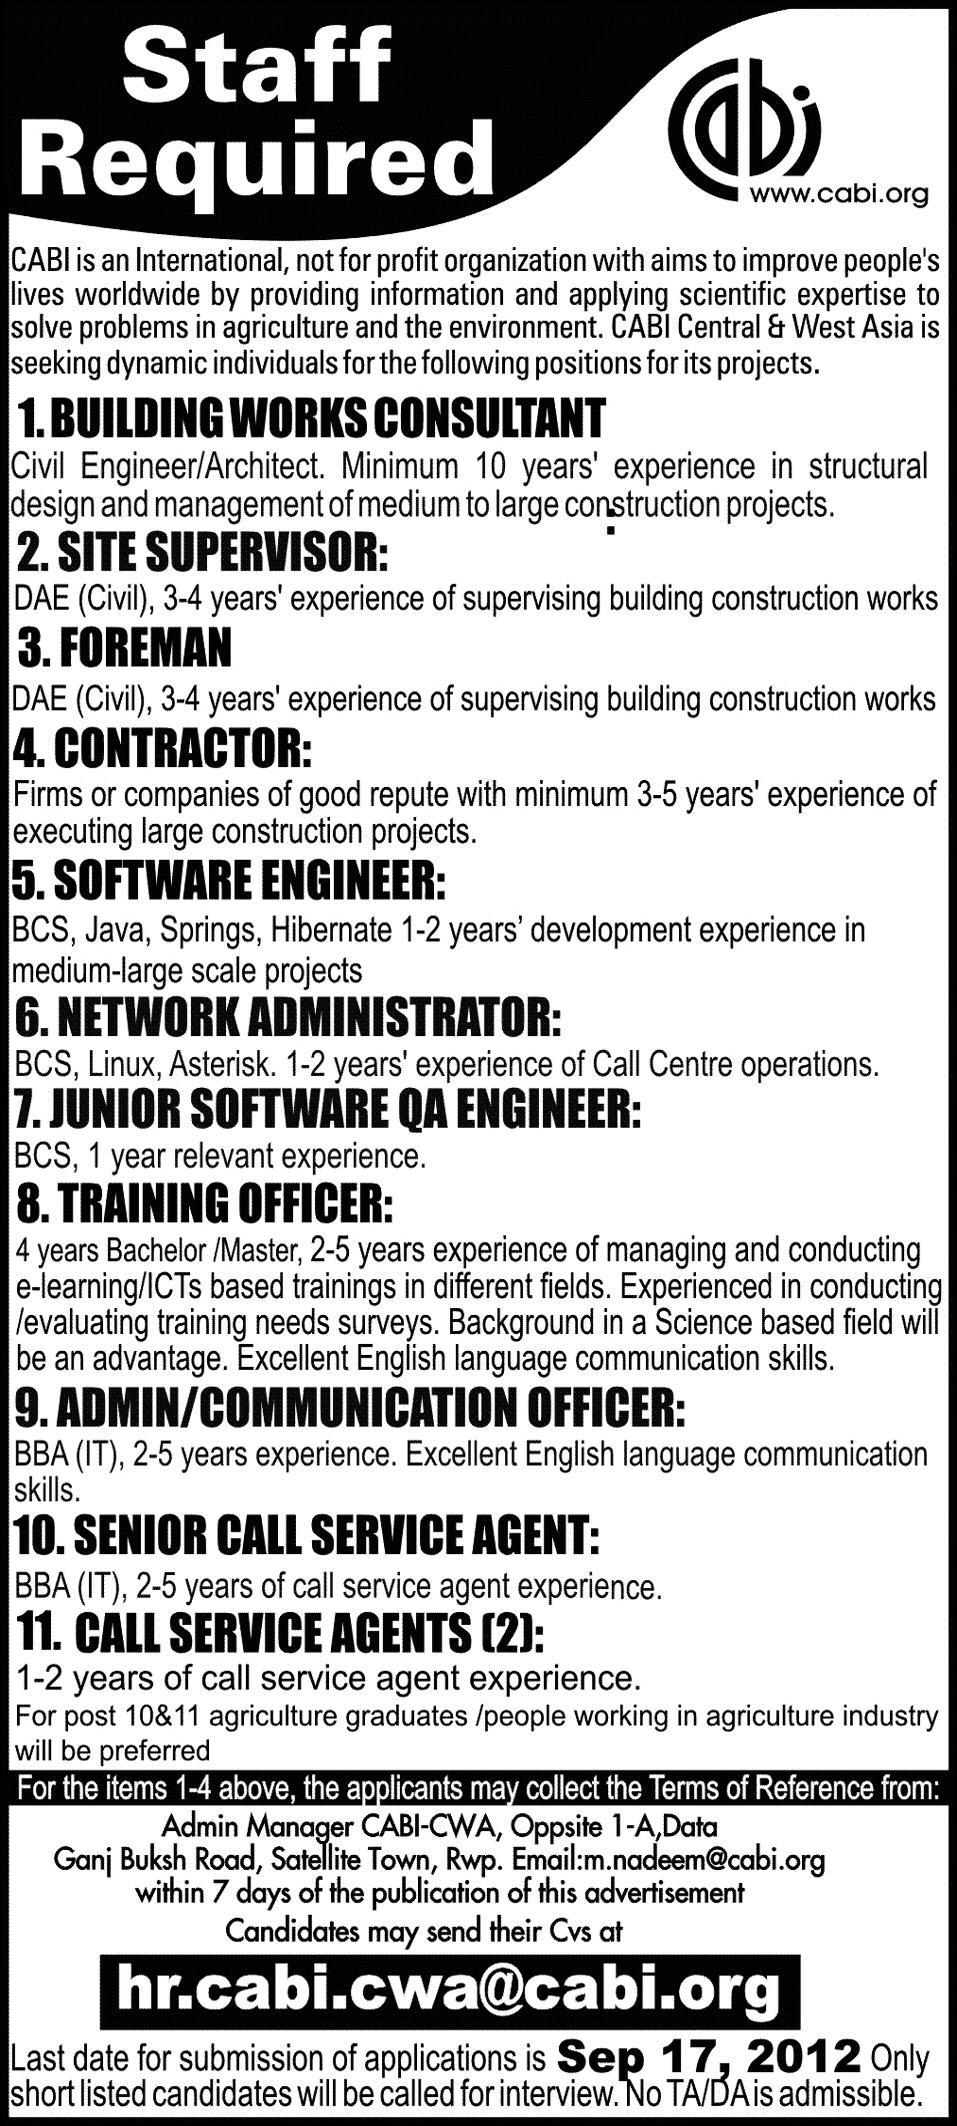 IT, Construction and Admin Staff Required by CABI (NGO Jobs)